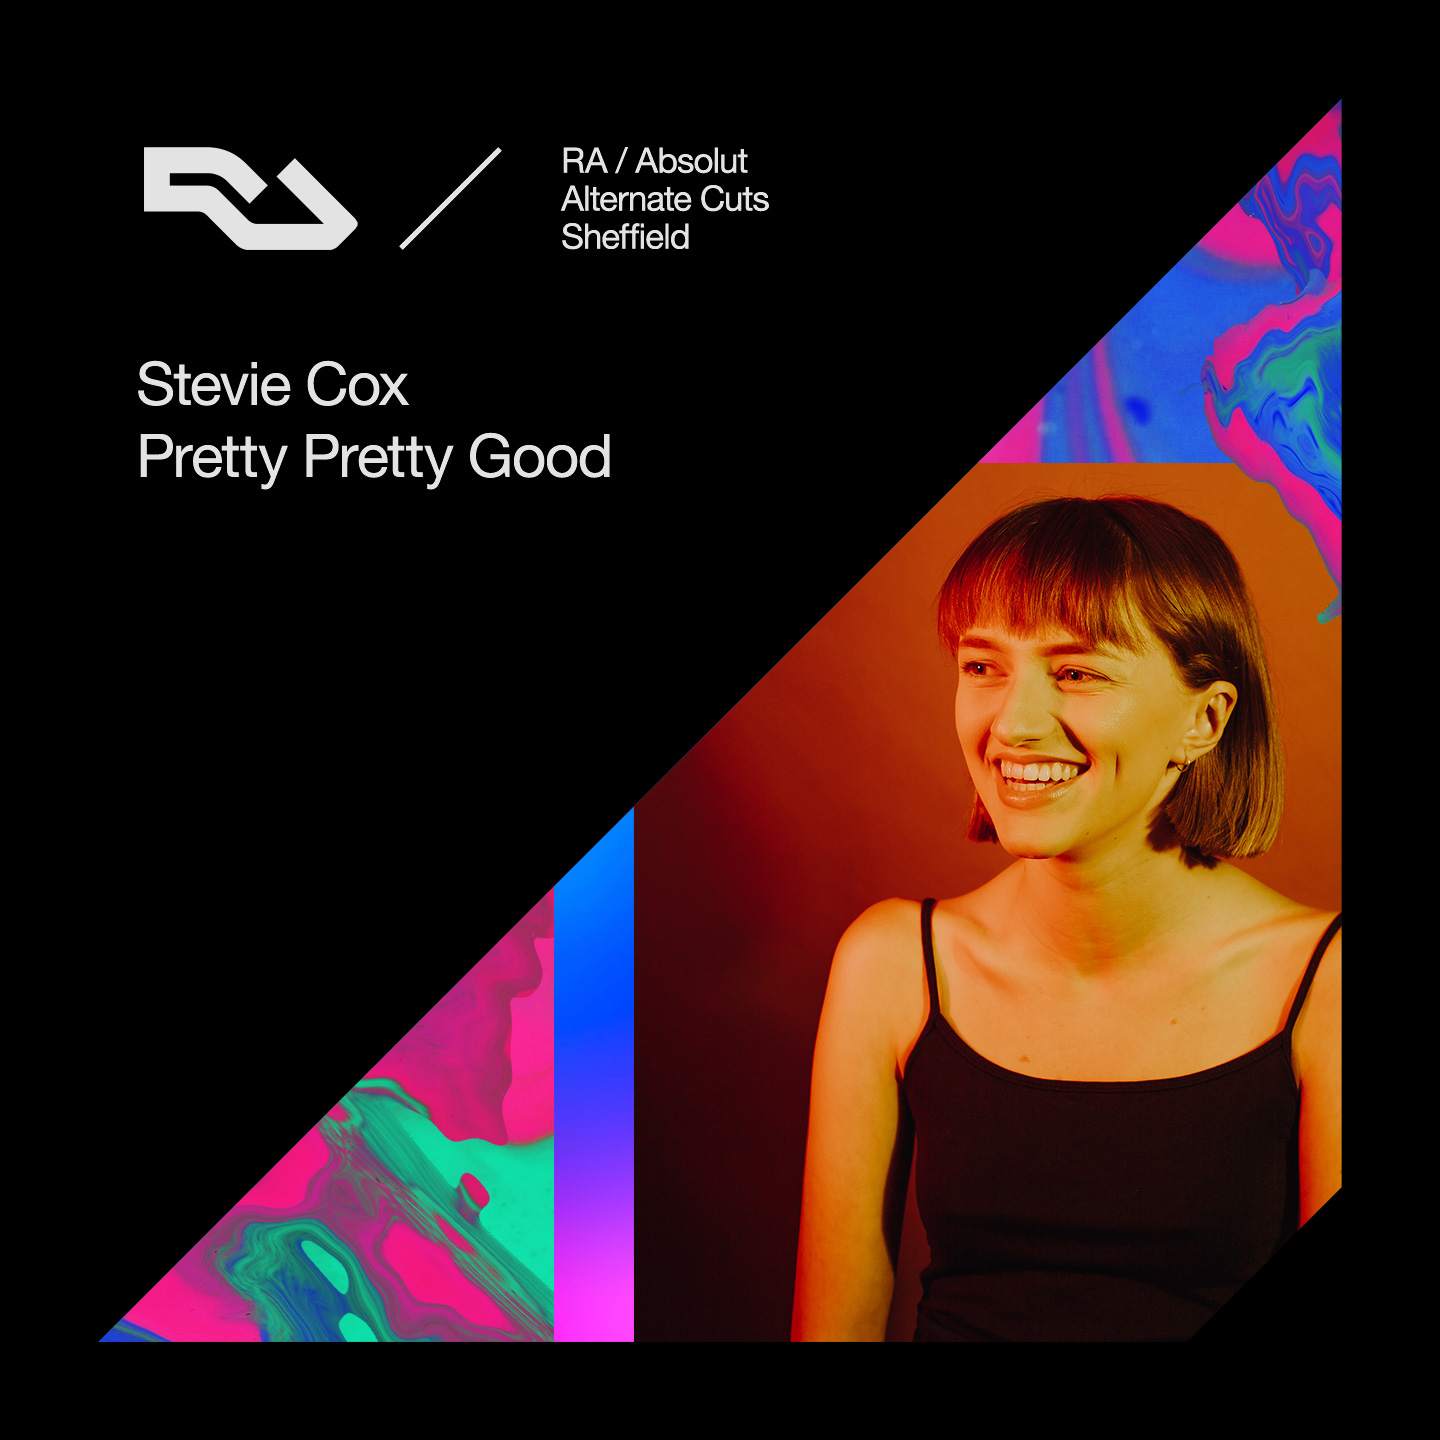 Listen to a mix from Stevie Cox of Pretty Pretty Good image